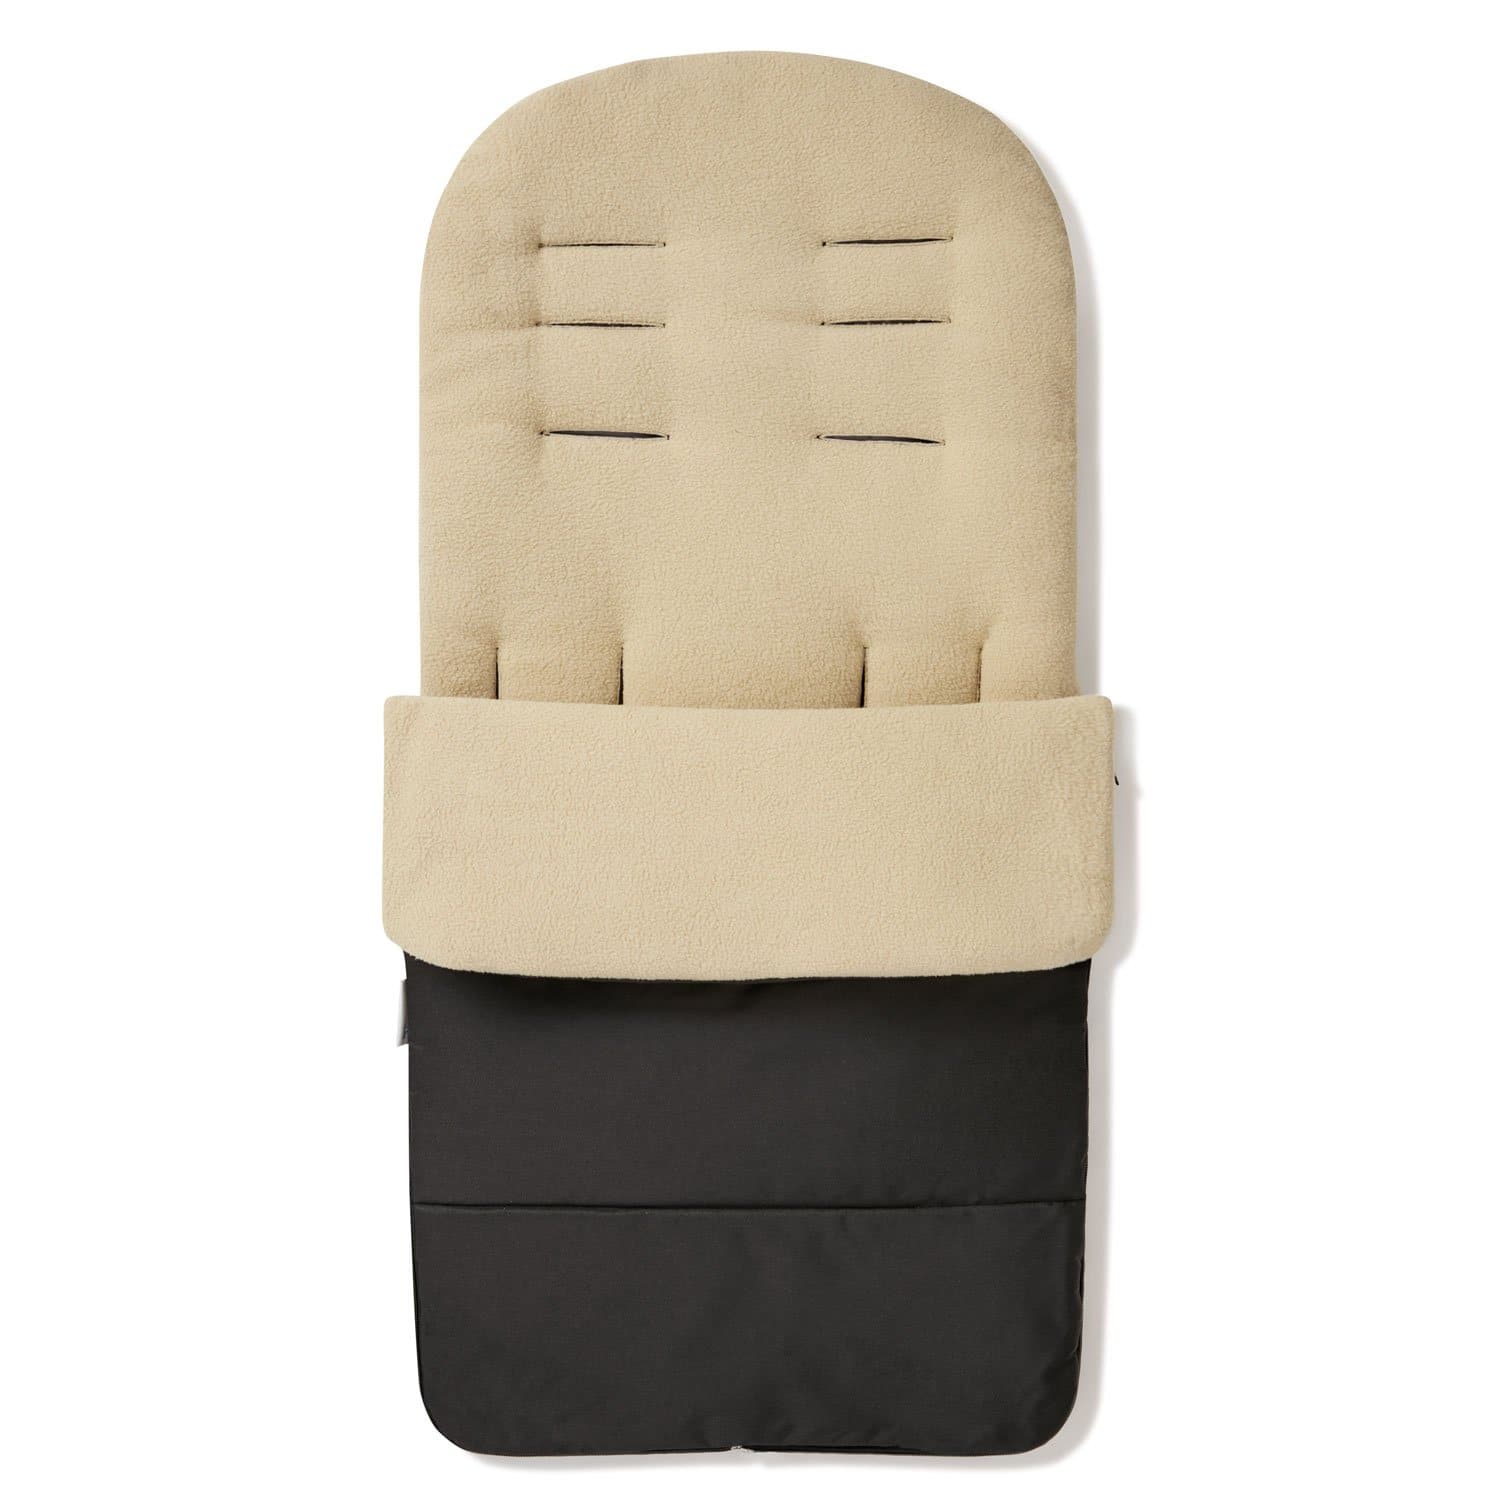 Premium Footmuff / Cosy Toes Compatible with My Babiie - Desert Sand / Fits All Models | For Your Little One